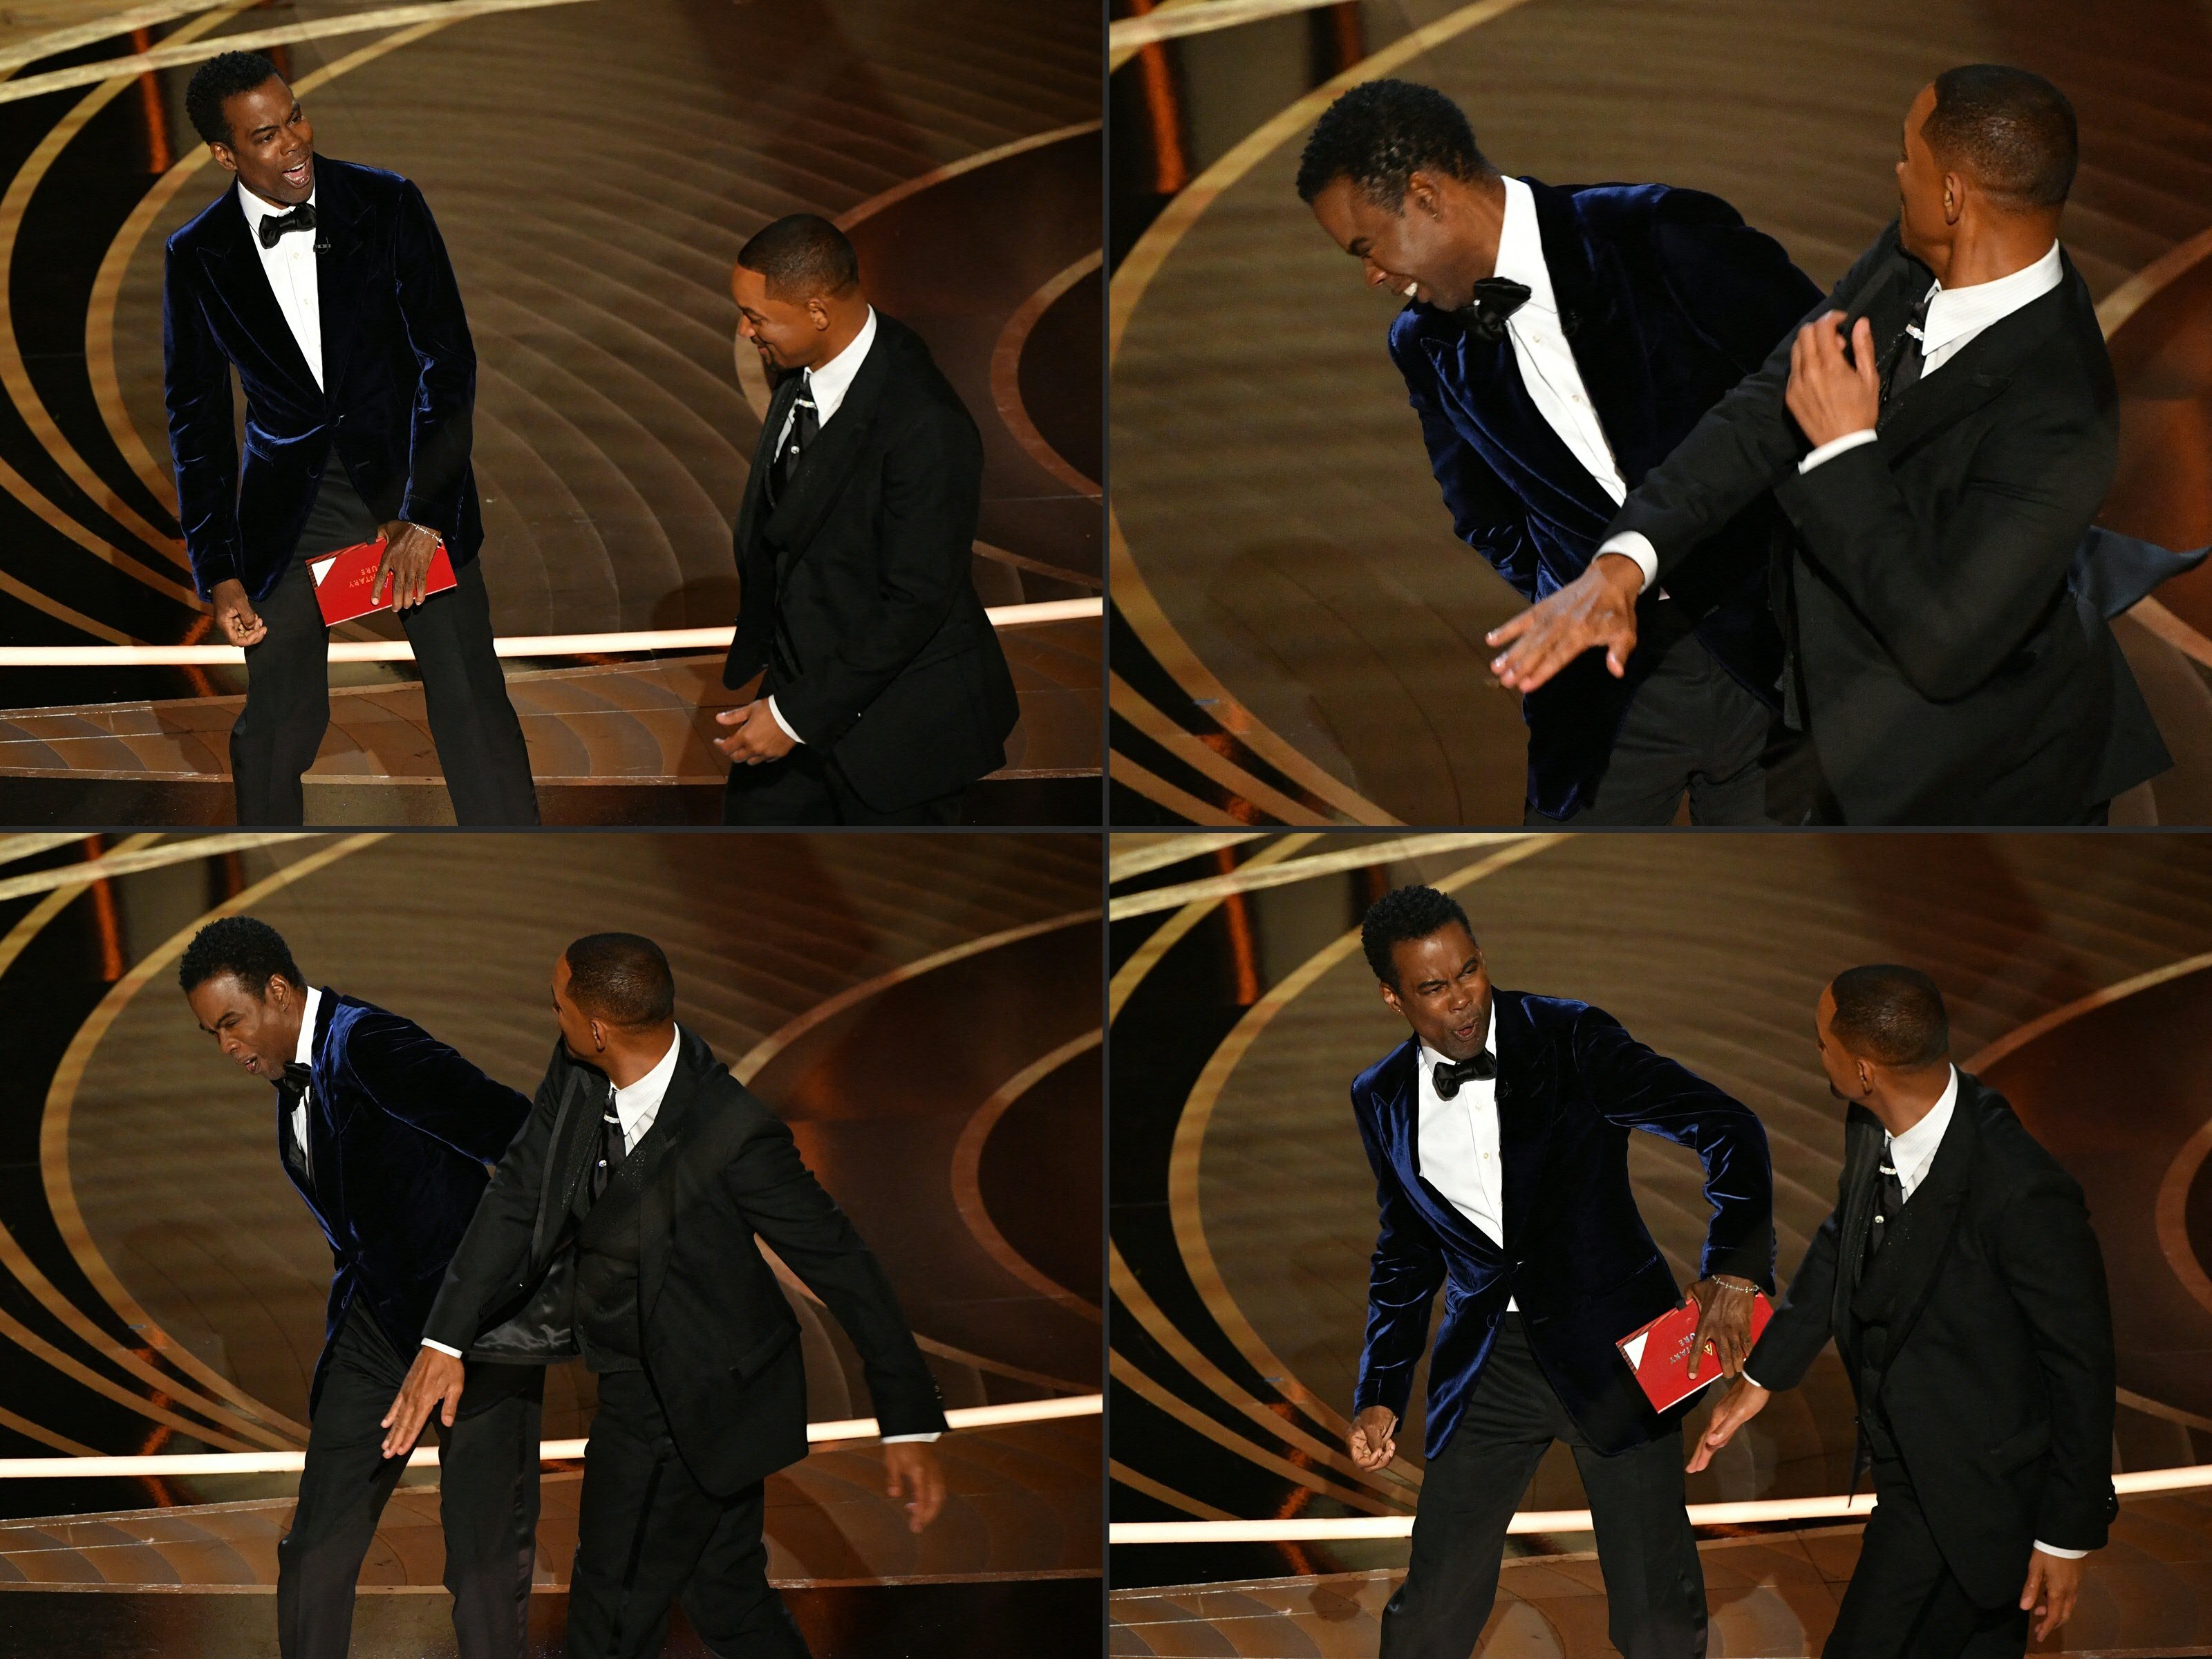 combination of pictures created on March 28, 2022 shows US actor Will Smith approaching US actor Chris Rock onstage at the Academy Awards